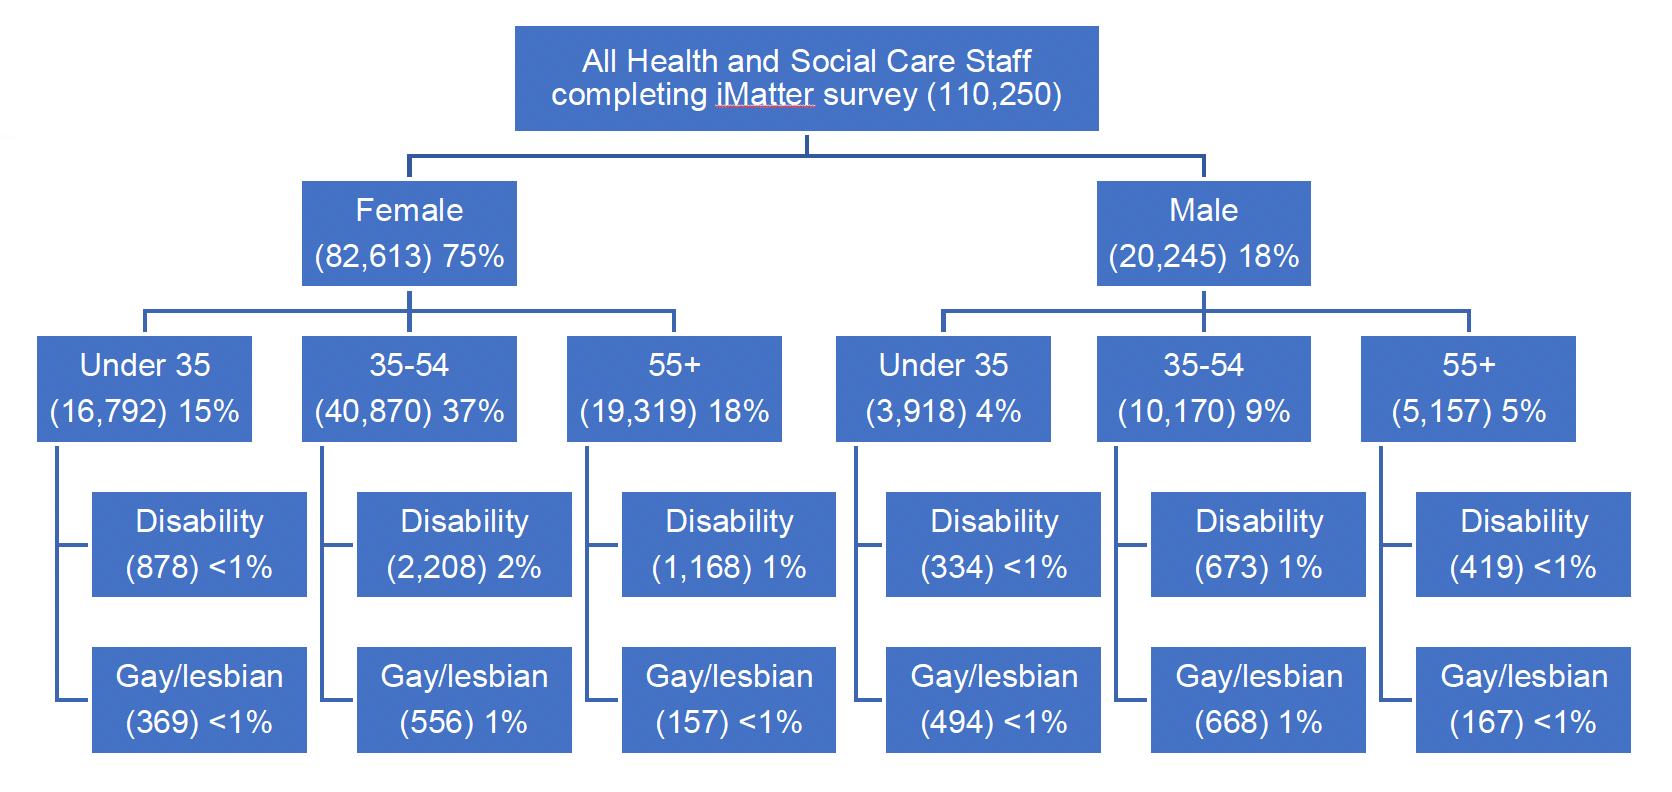 Comparison of the number of female and male health and social care staff broken down by age, disability and sexual orientation. Appendix 3 presents numbers in an accessible format. 